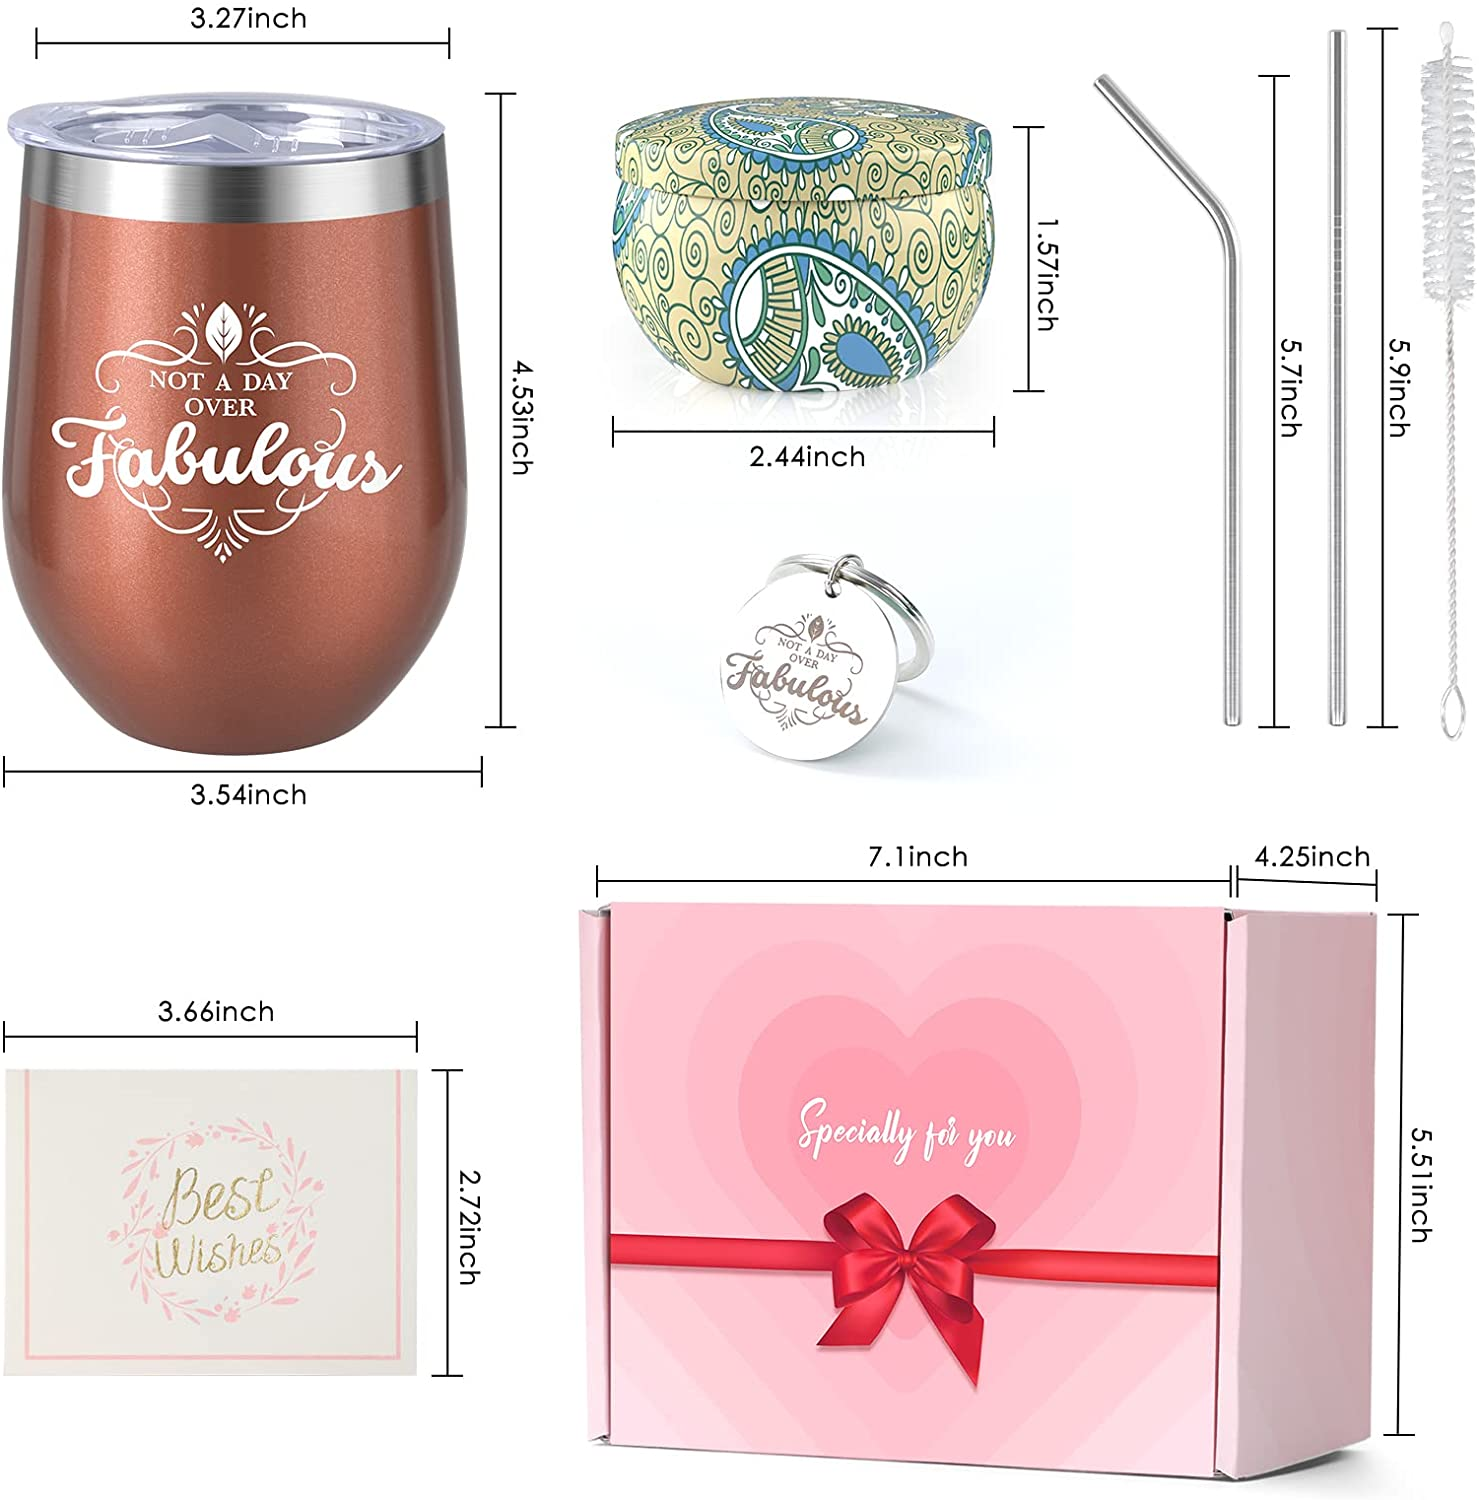 Mothers Day Gifts Candle Tumbler, Birthday Gifts for Women Best Friends Mom Sister, Insulated Wine Tumbler with Lid 4 Scented Candles Set, Birthday Gifts Box for Her with Wine Tumbler Gift Set